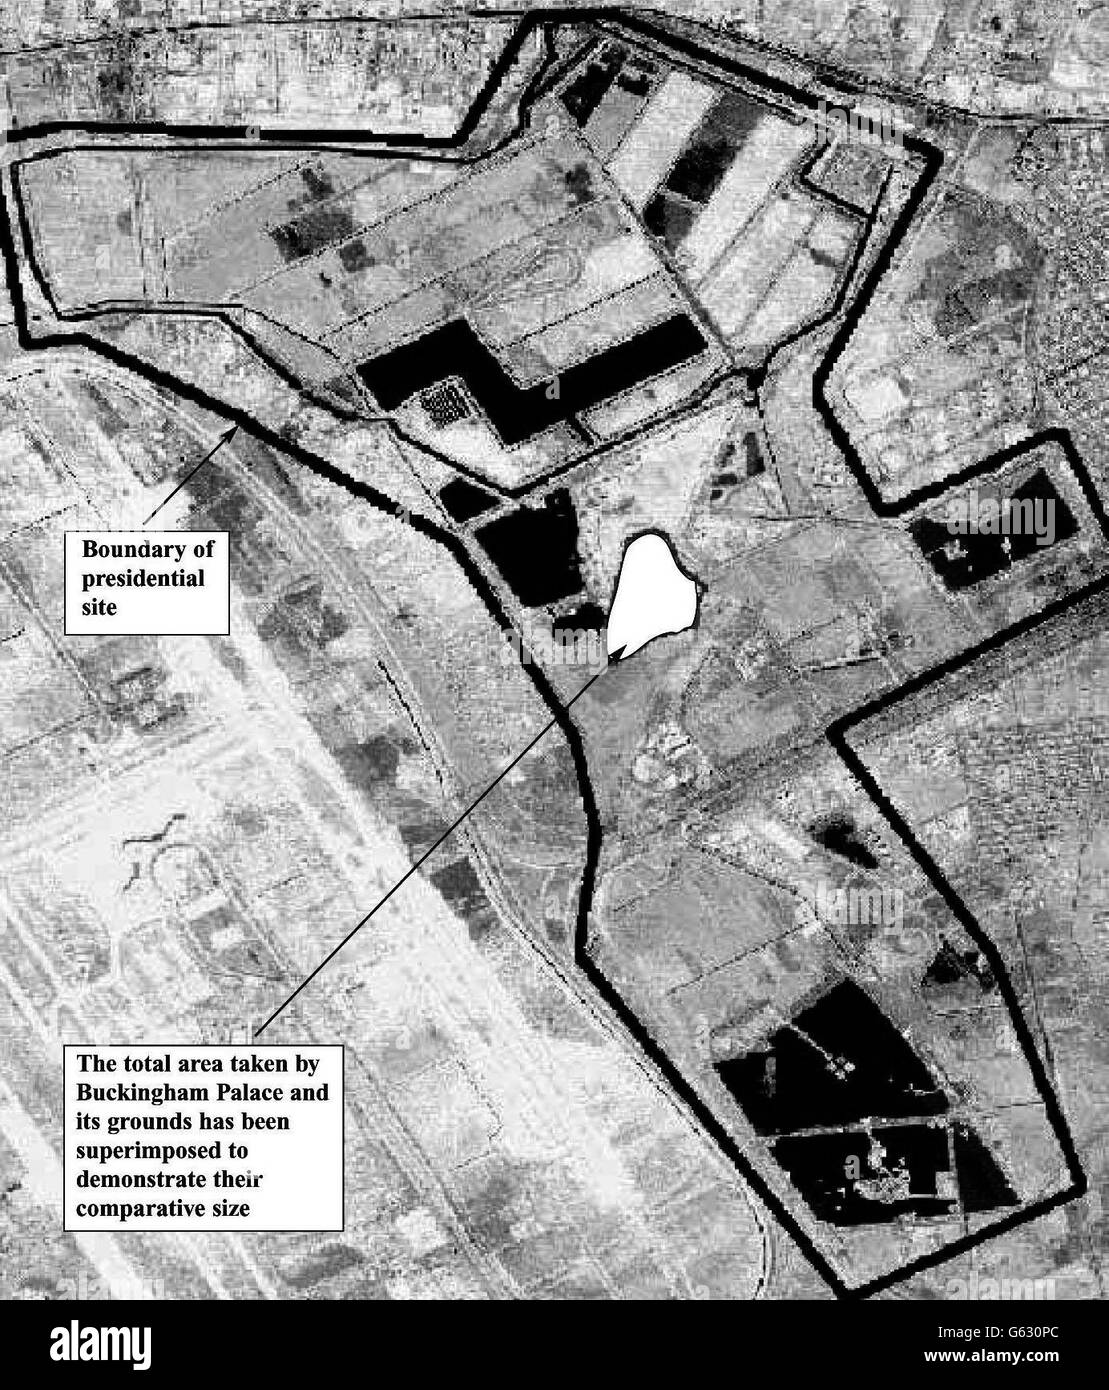 Photograph from the dossier of evidence against Saddam Hussein published by the British Government of one of eight 'presidential sites' or what have been called 'palaces' from which it says UNSCOM inspectors have been banned by the Iraqis. * on the grounds they are sovereign. The report says that many of these so-called palaces are in fact large compounds which are an integral part of Iraqi counter-measures designed to hide weapons material. Stock Photo